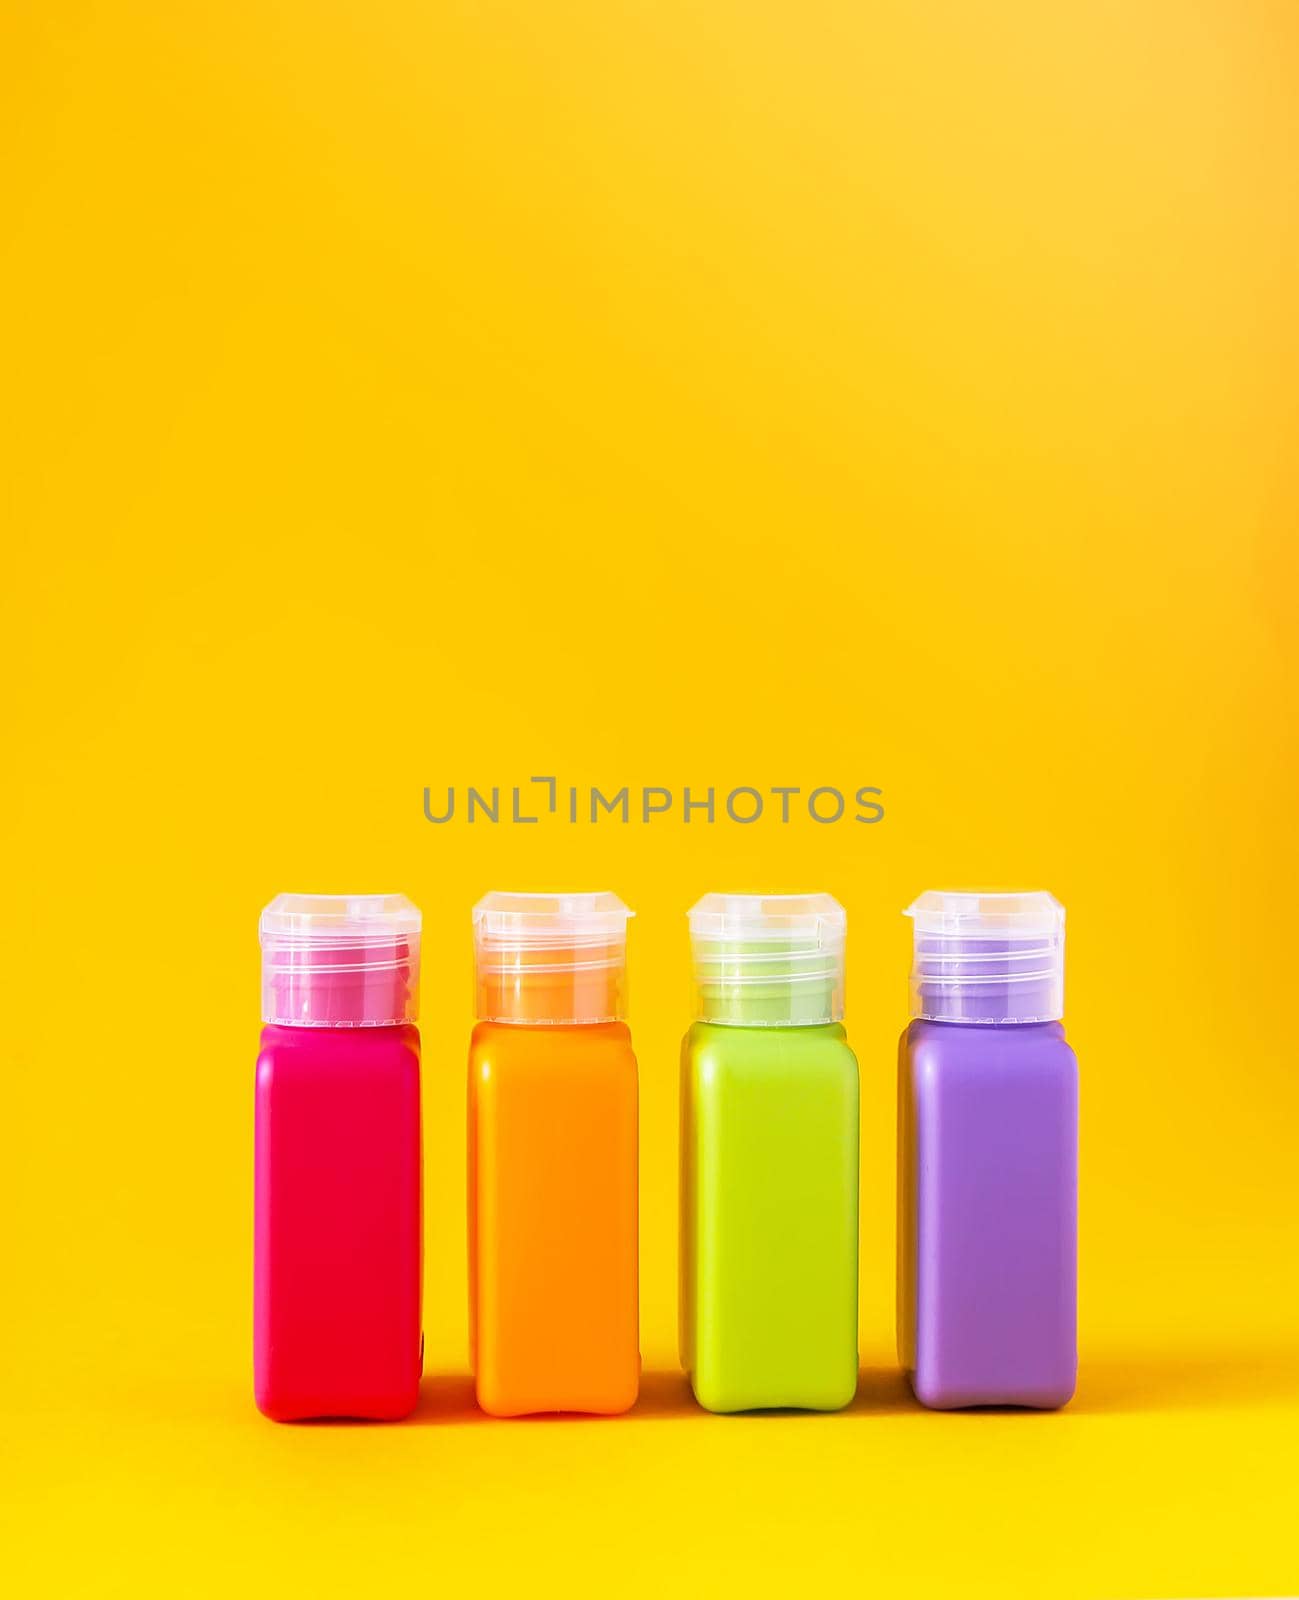 Colorful plastic bottles for skincare products on bright yellow background